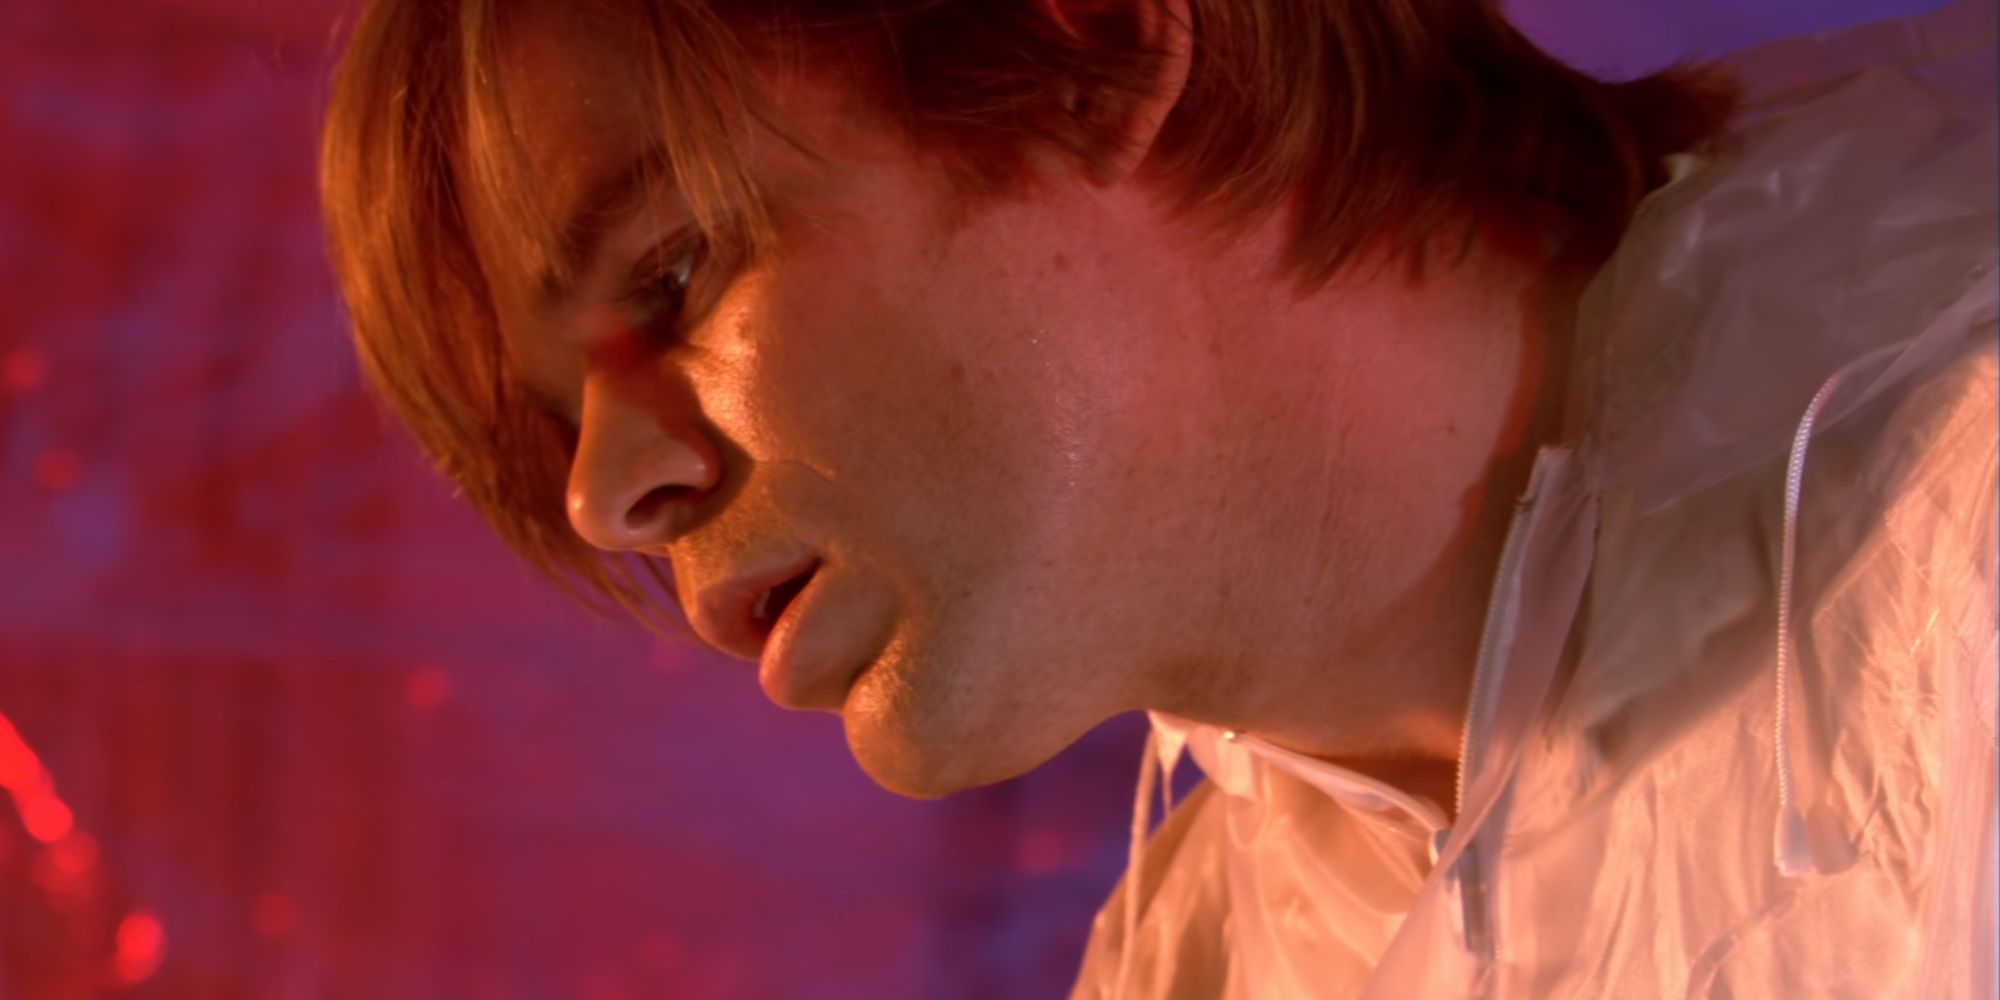 Michael C Hall as Young Dexter looking down at something offscreen in Dexter